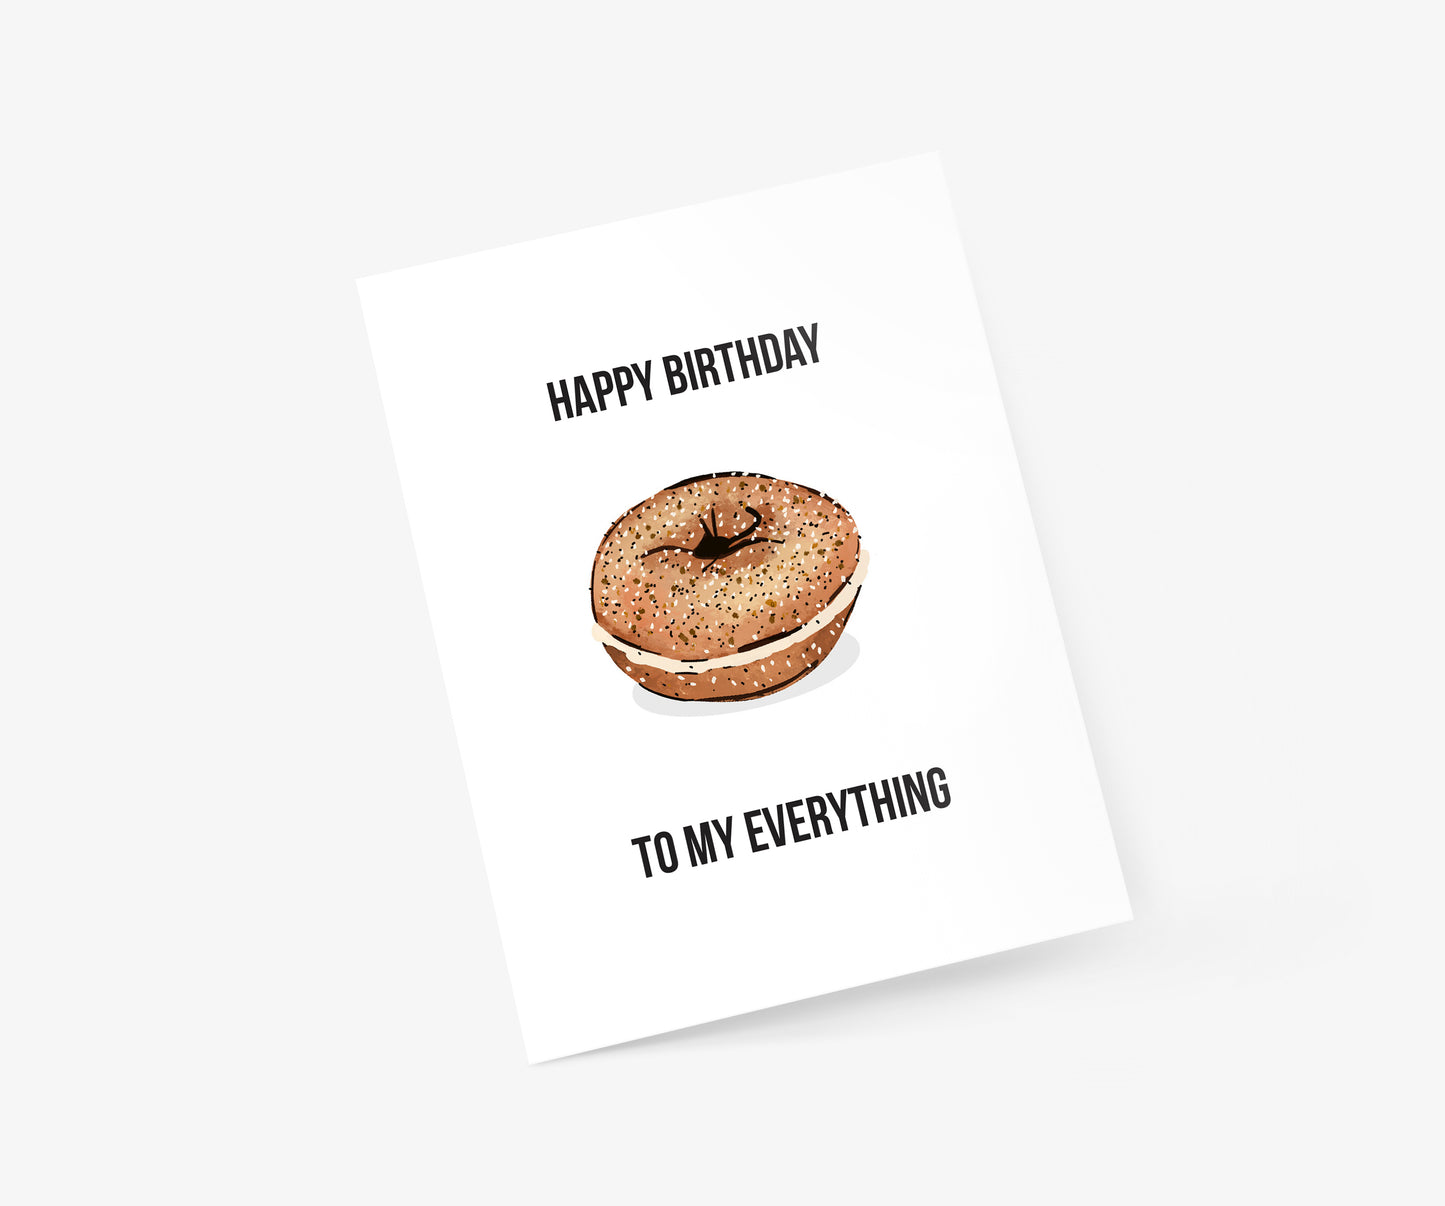 Happy Birthday to My Everything Birthday Card | Footnotes Paper